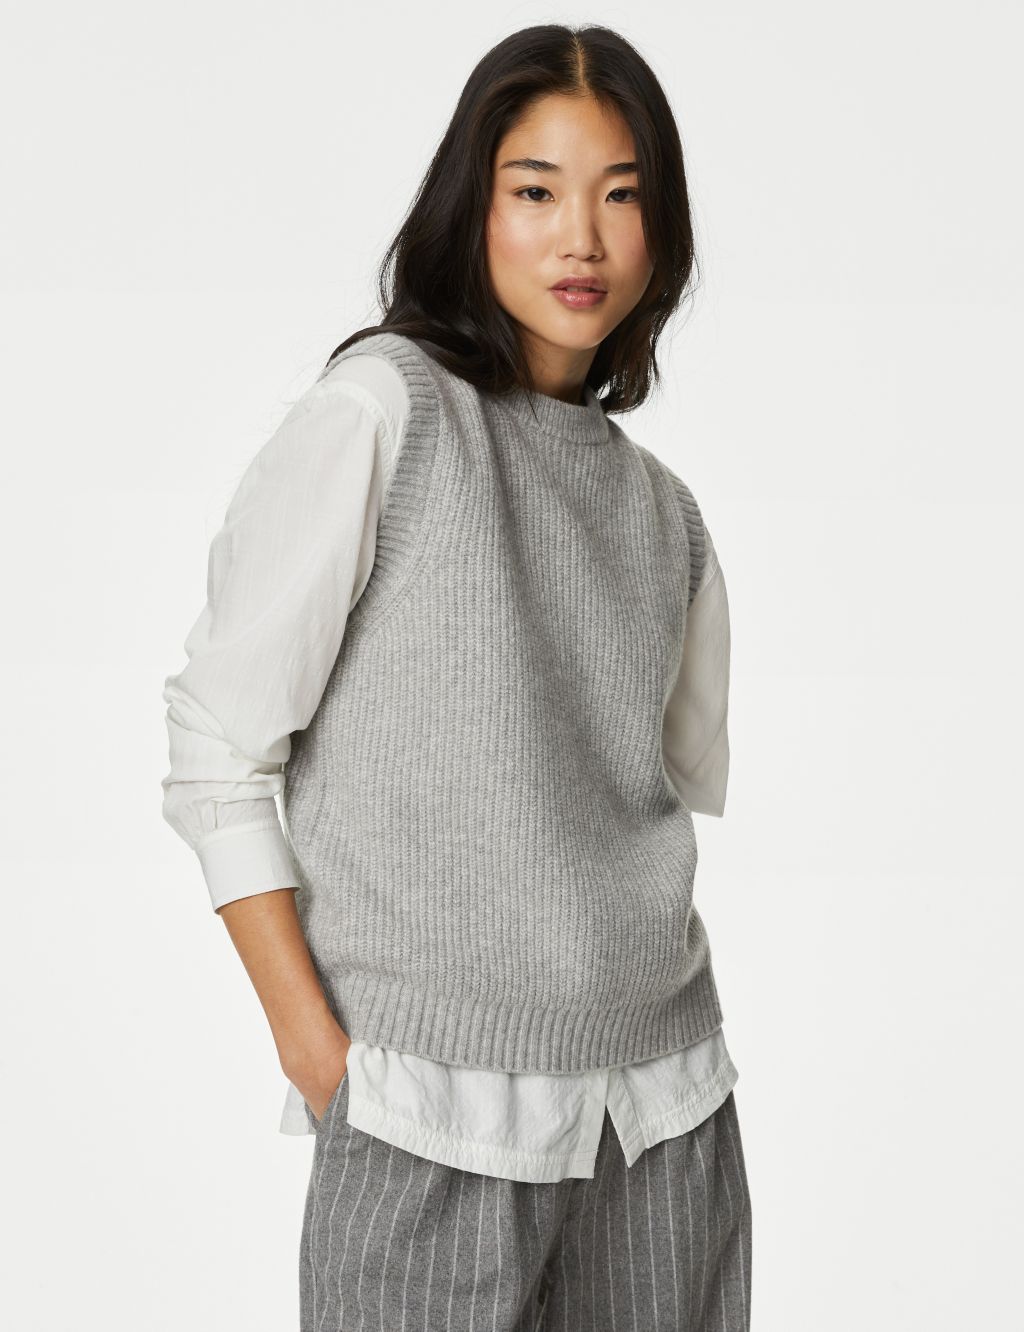 Ribbed Collar Sweater Vest – CURRENT AIR